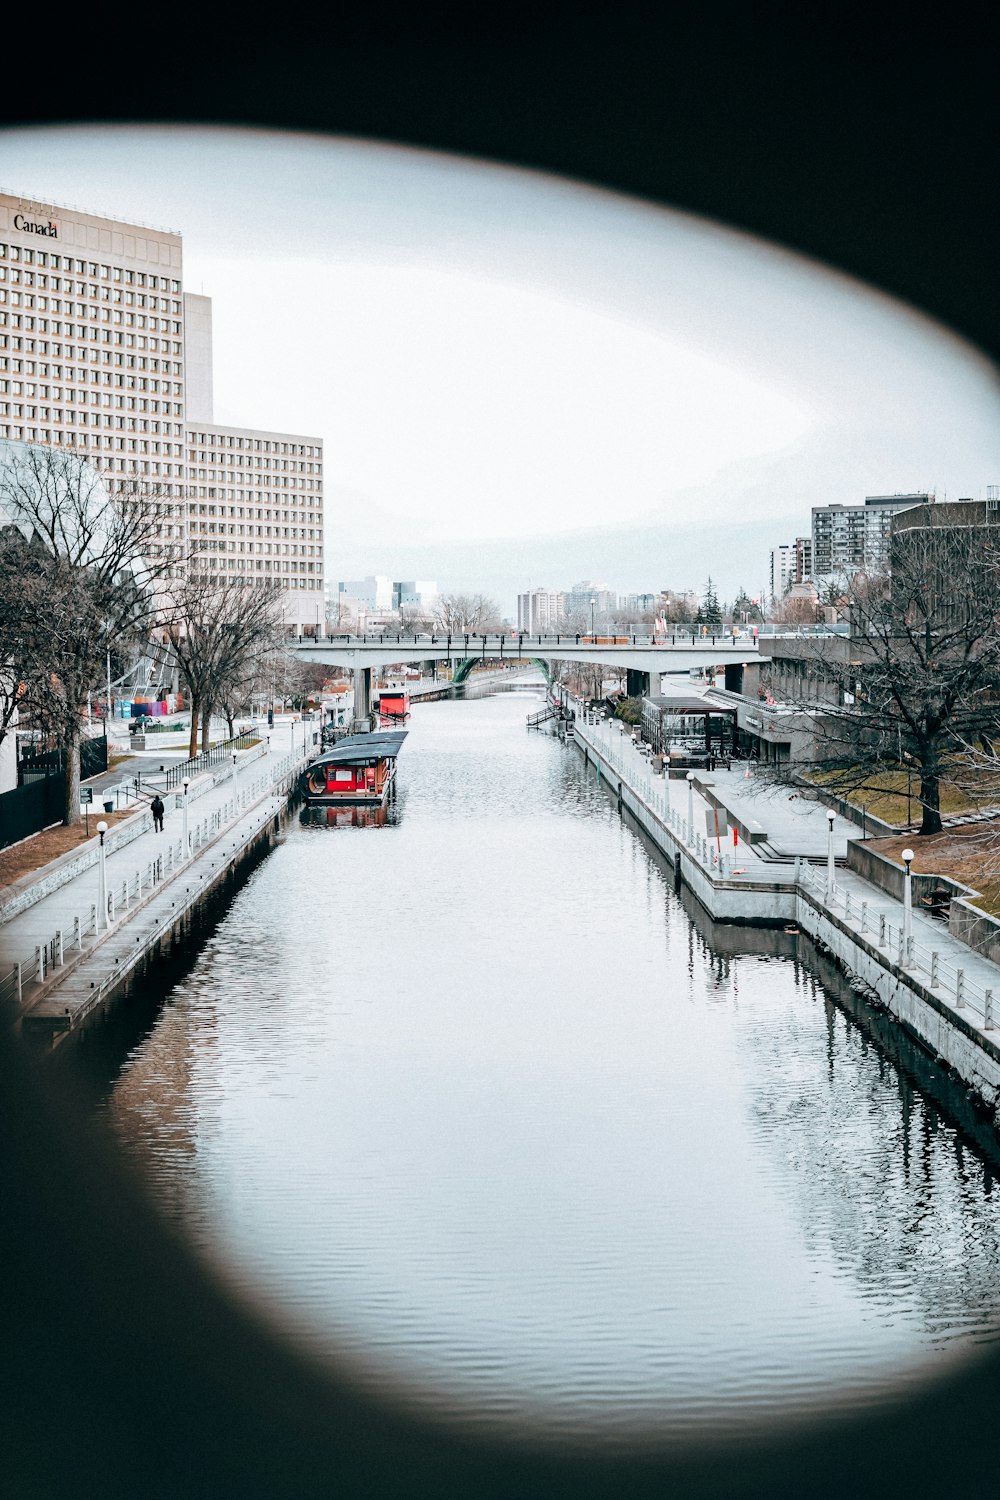 a view of a waterway in a city